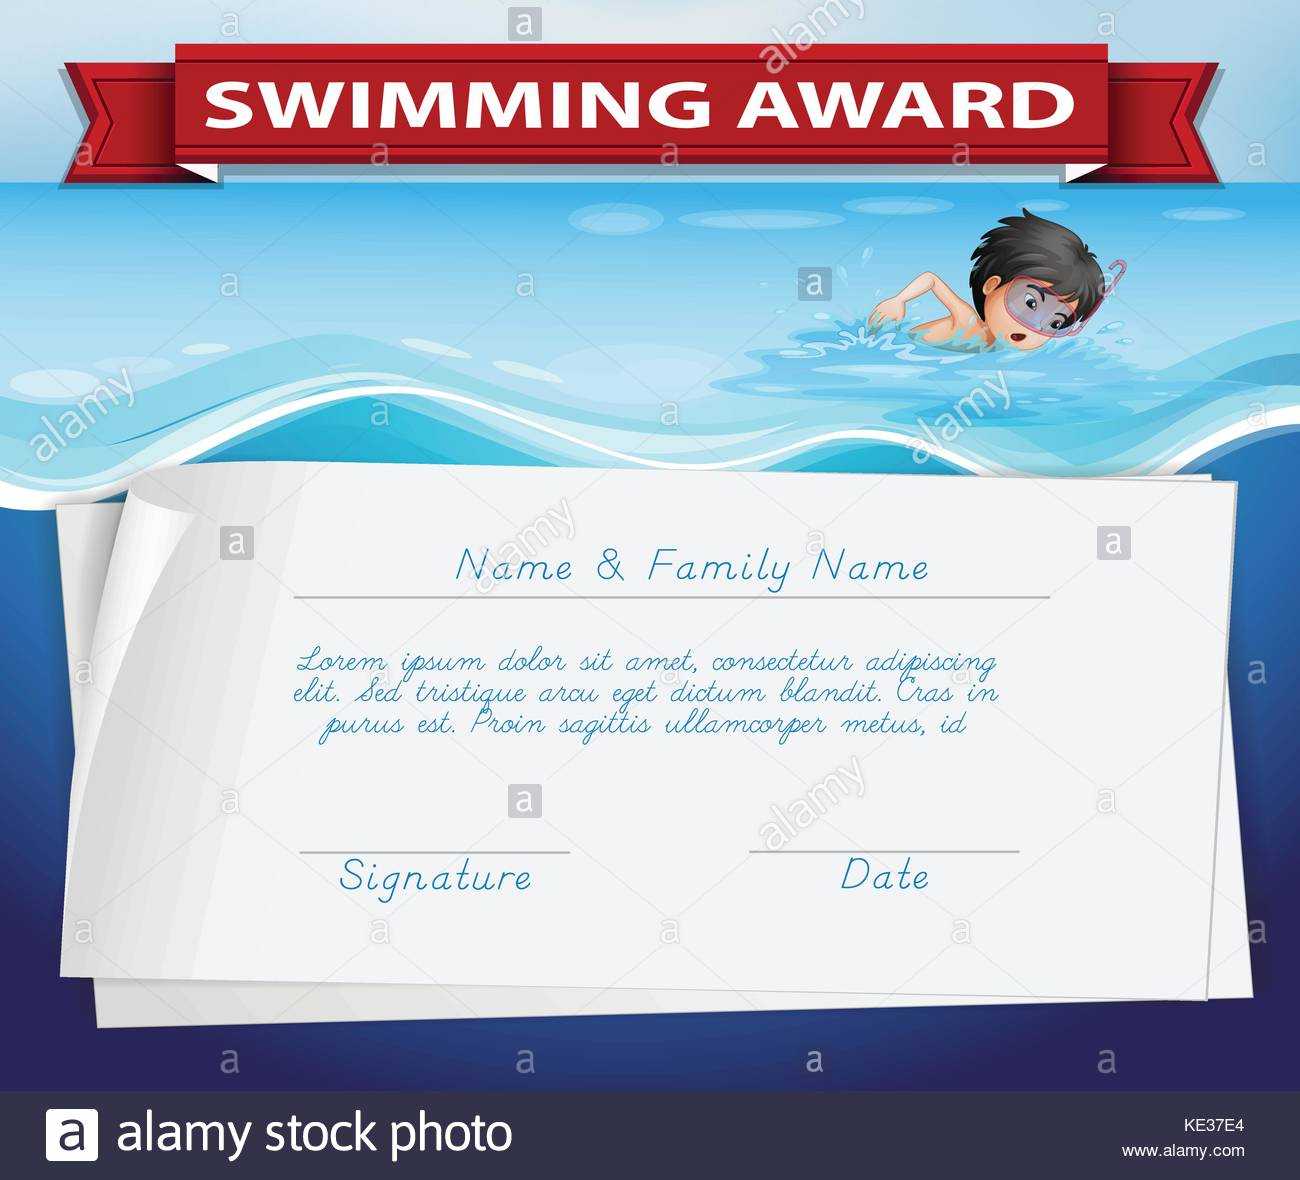 Template Of Certificate For Swimming Award Illustration With Regard To Swimming Award Certificate Template